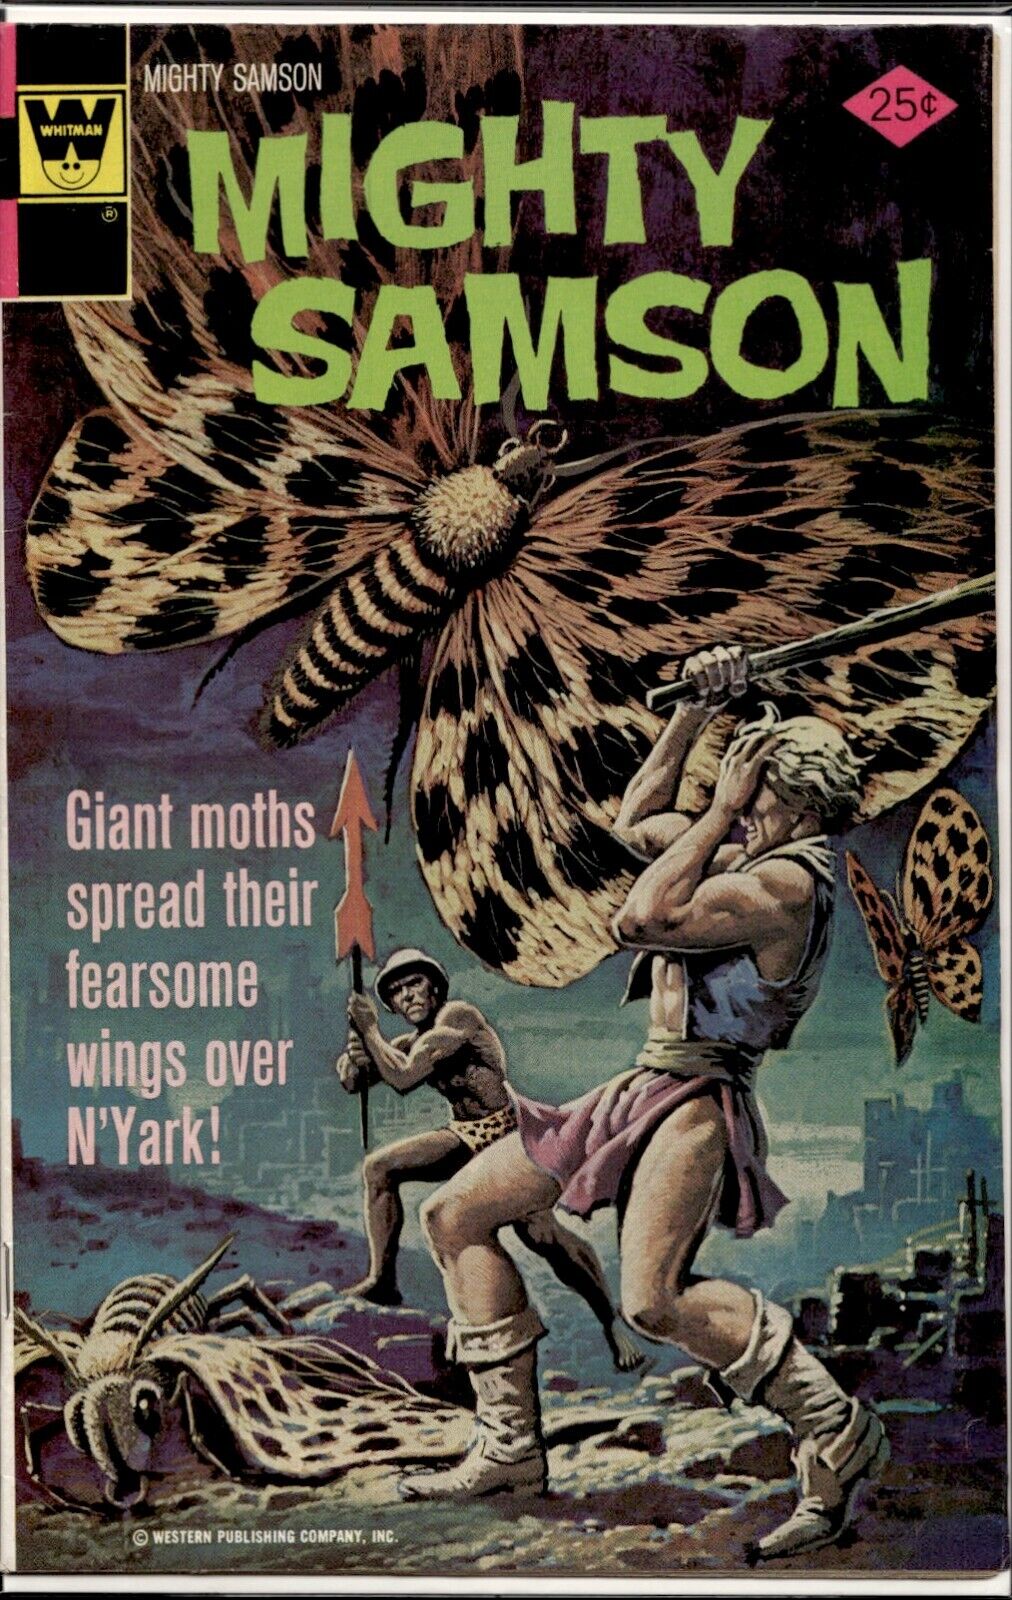 Mighty Samson 31 Gold Key Comics March 1976 Silver Age Giant Moth